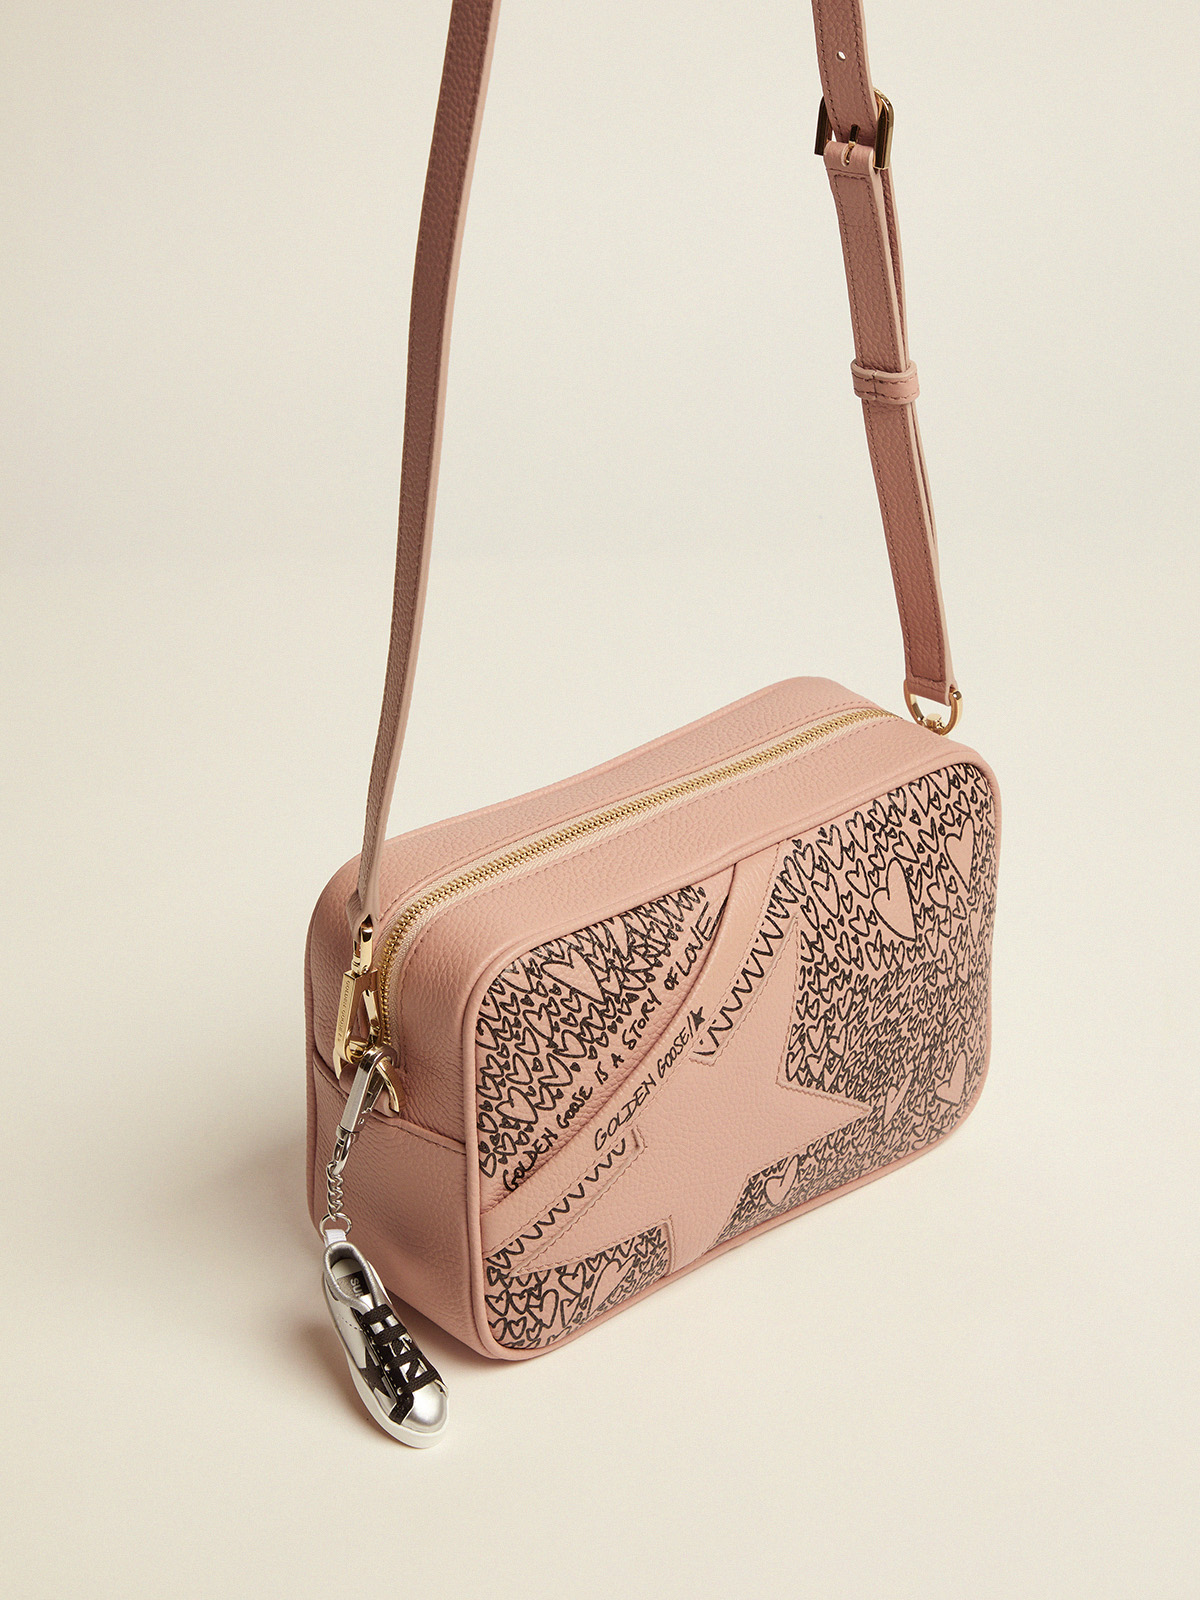 Nude Star Bag made of hammered leather with love-themed designs